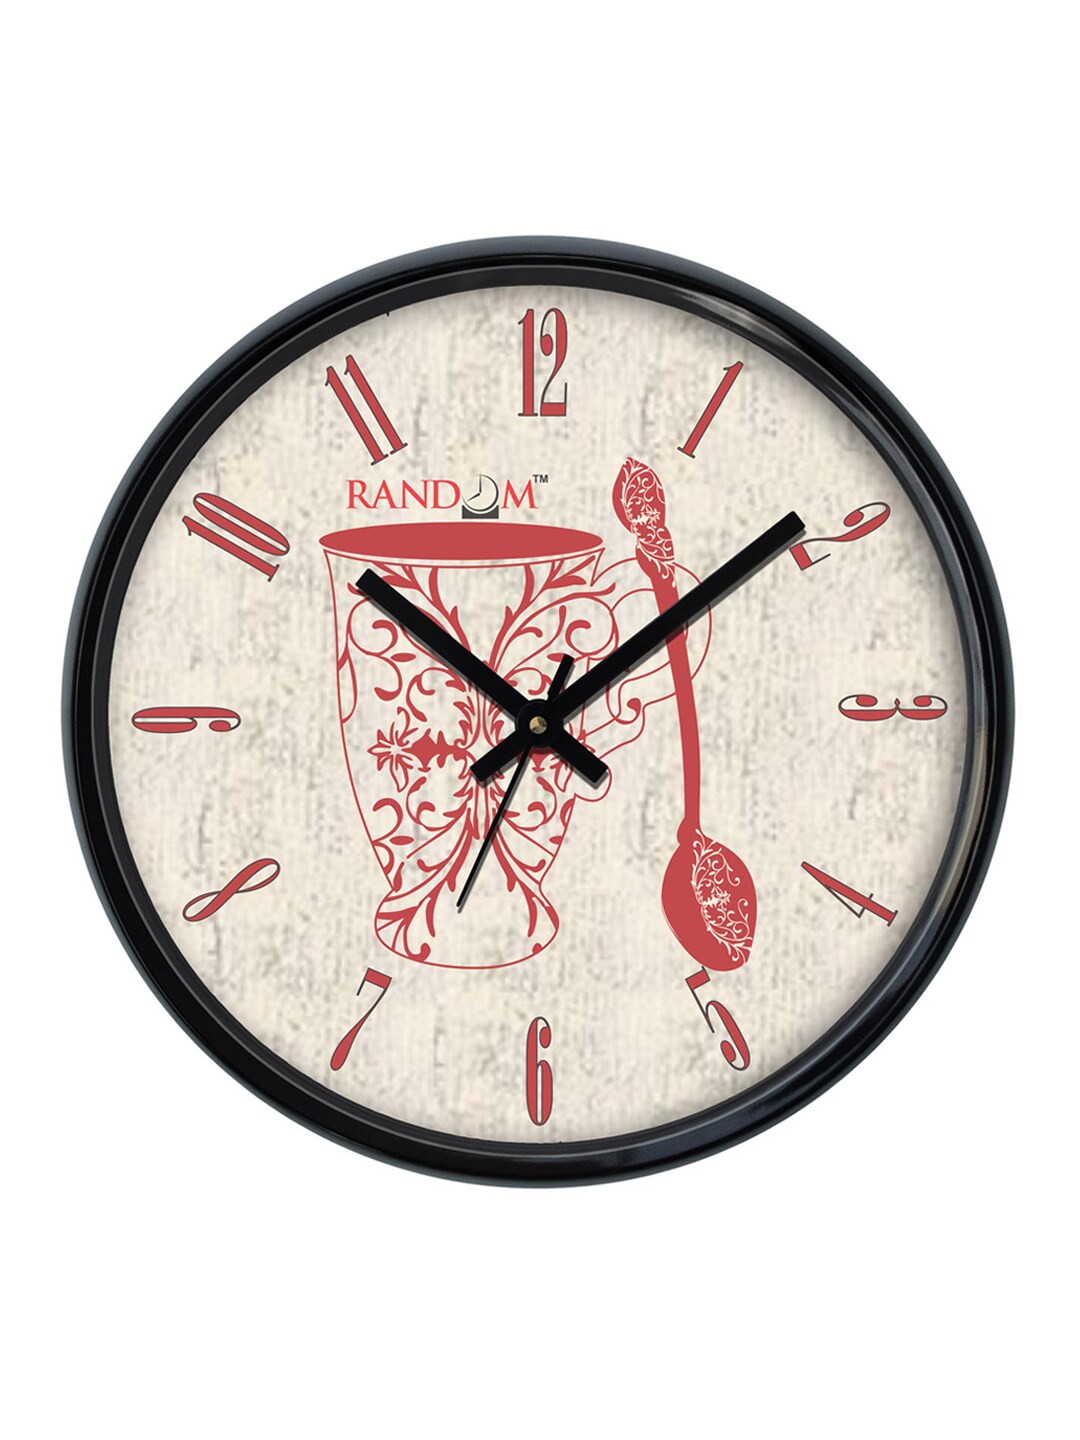 RANDOM Beige Dial Round Analogue Plastic Wall Clock Price in India